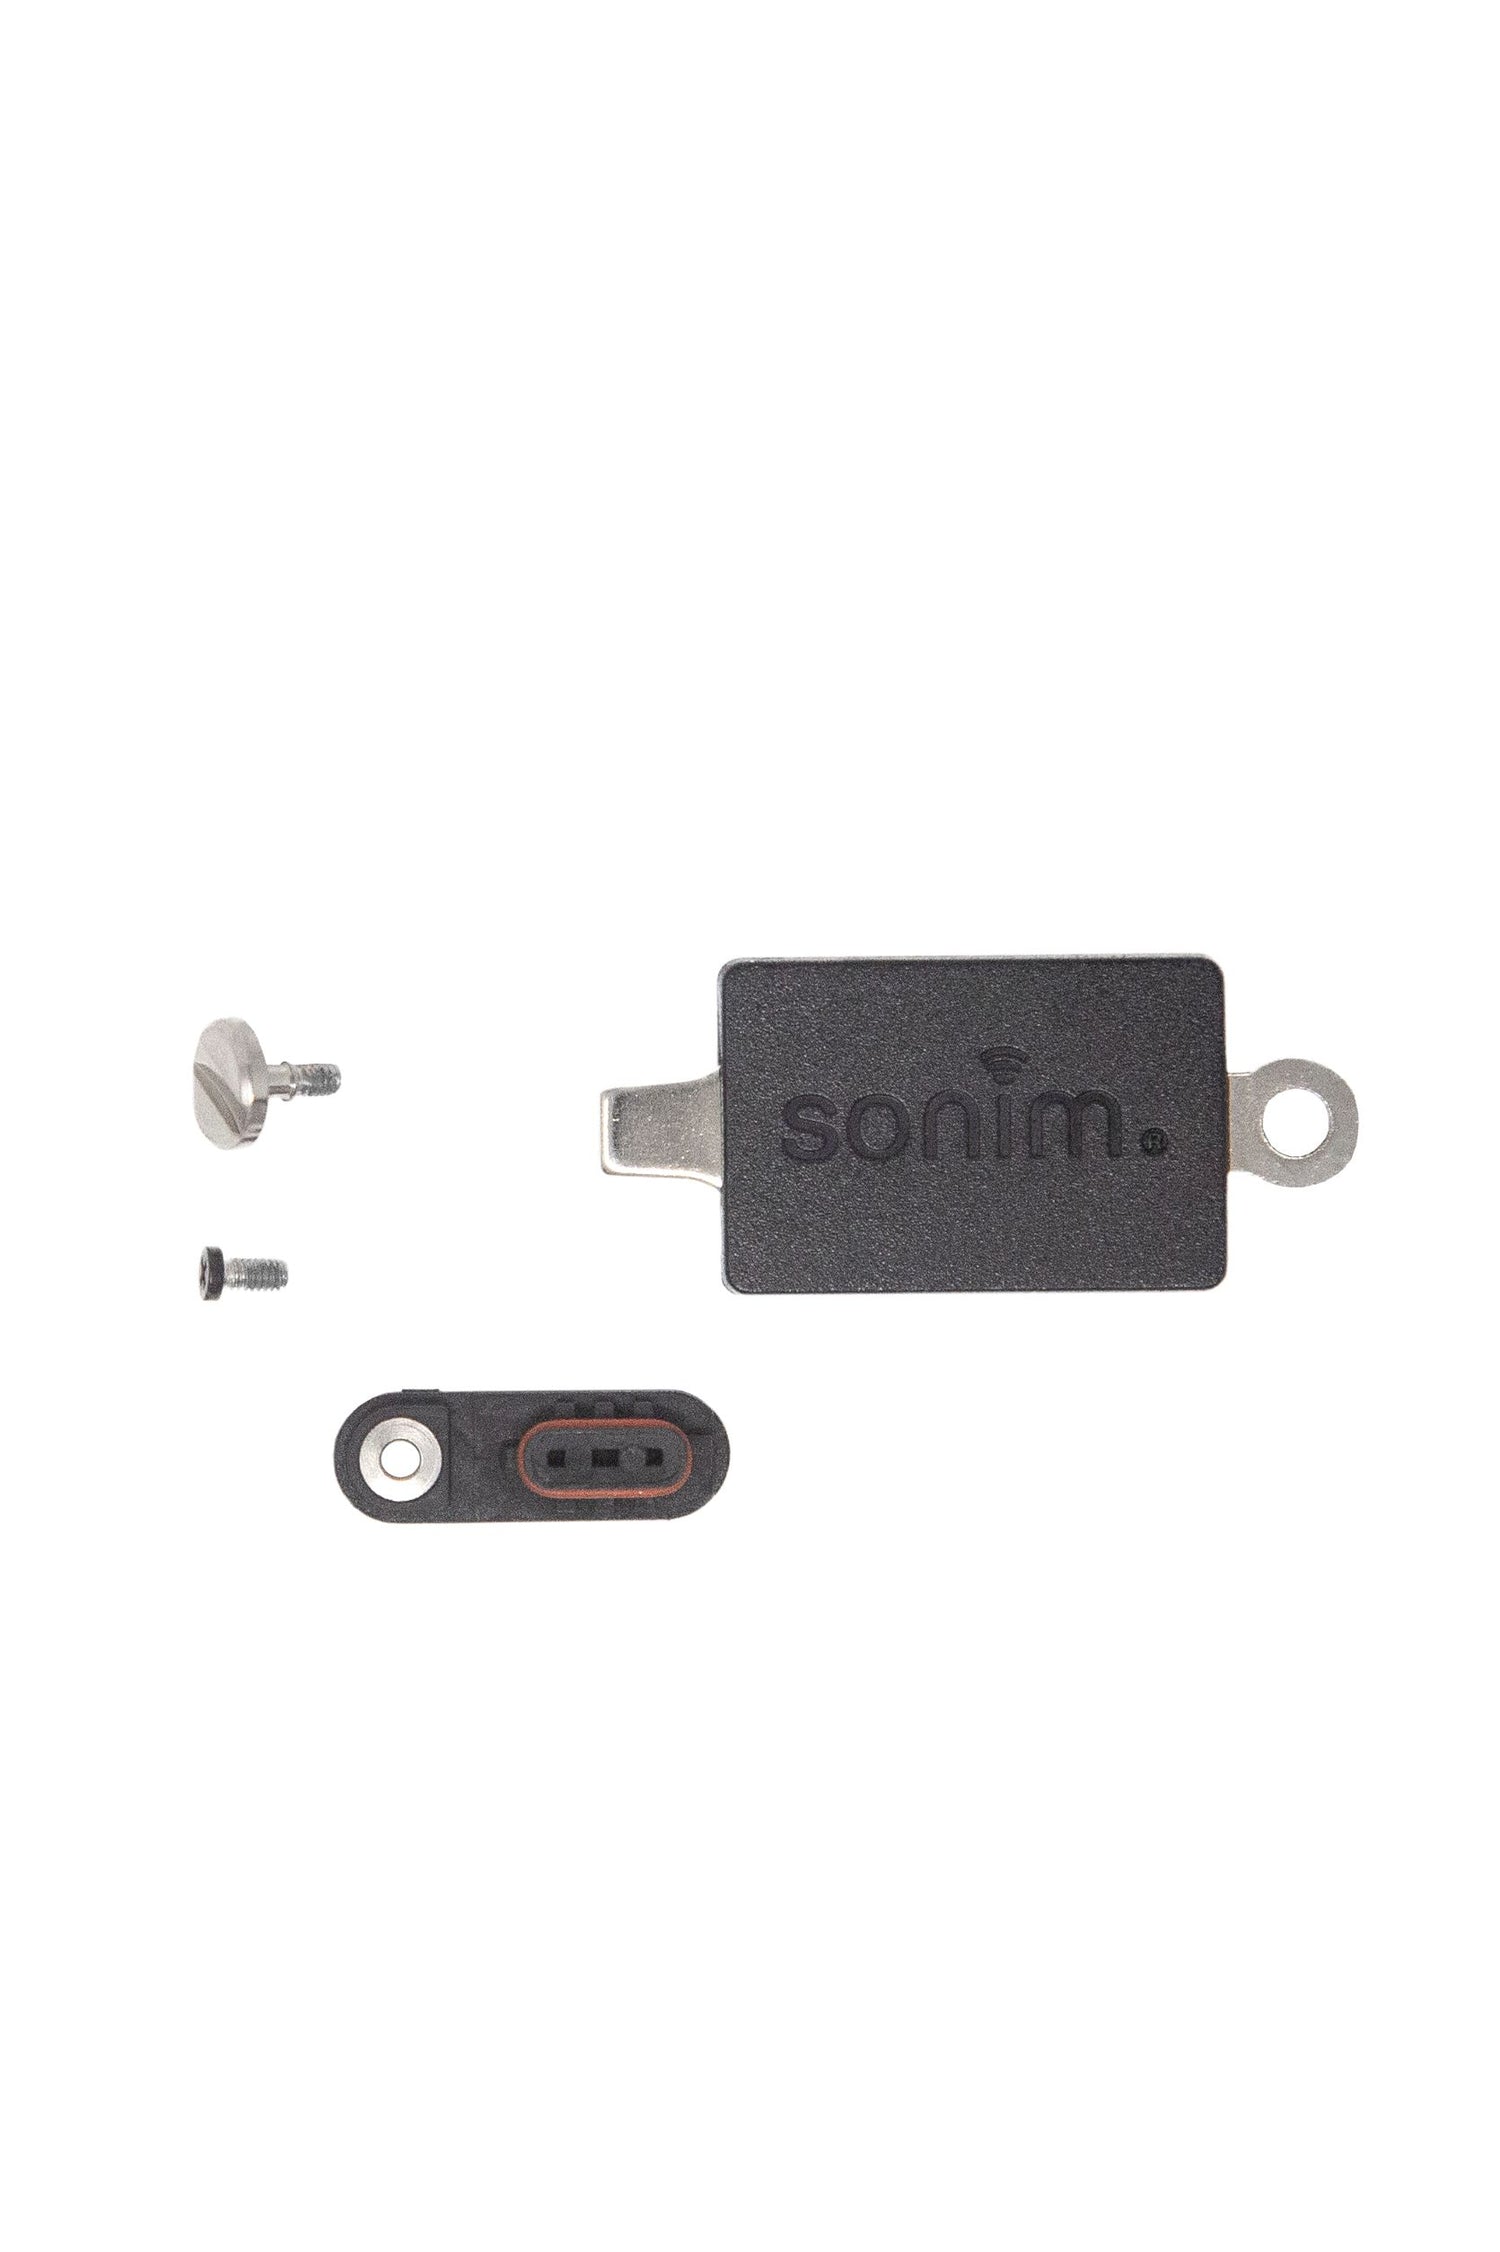 Sonim Rescue Kit for XP5s phone. 